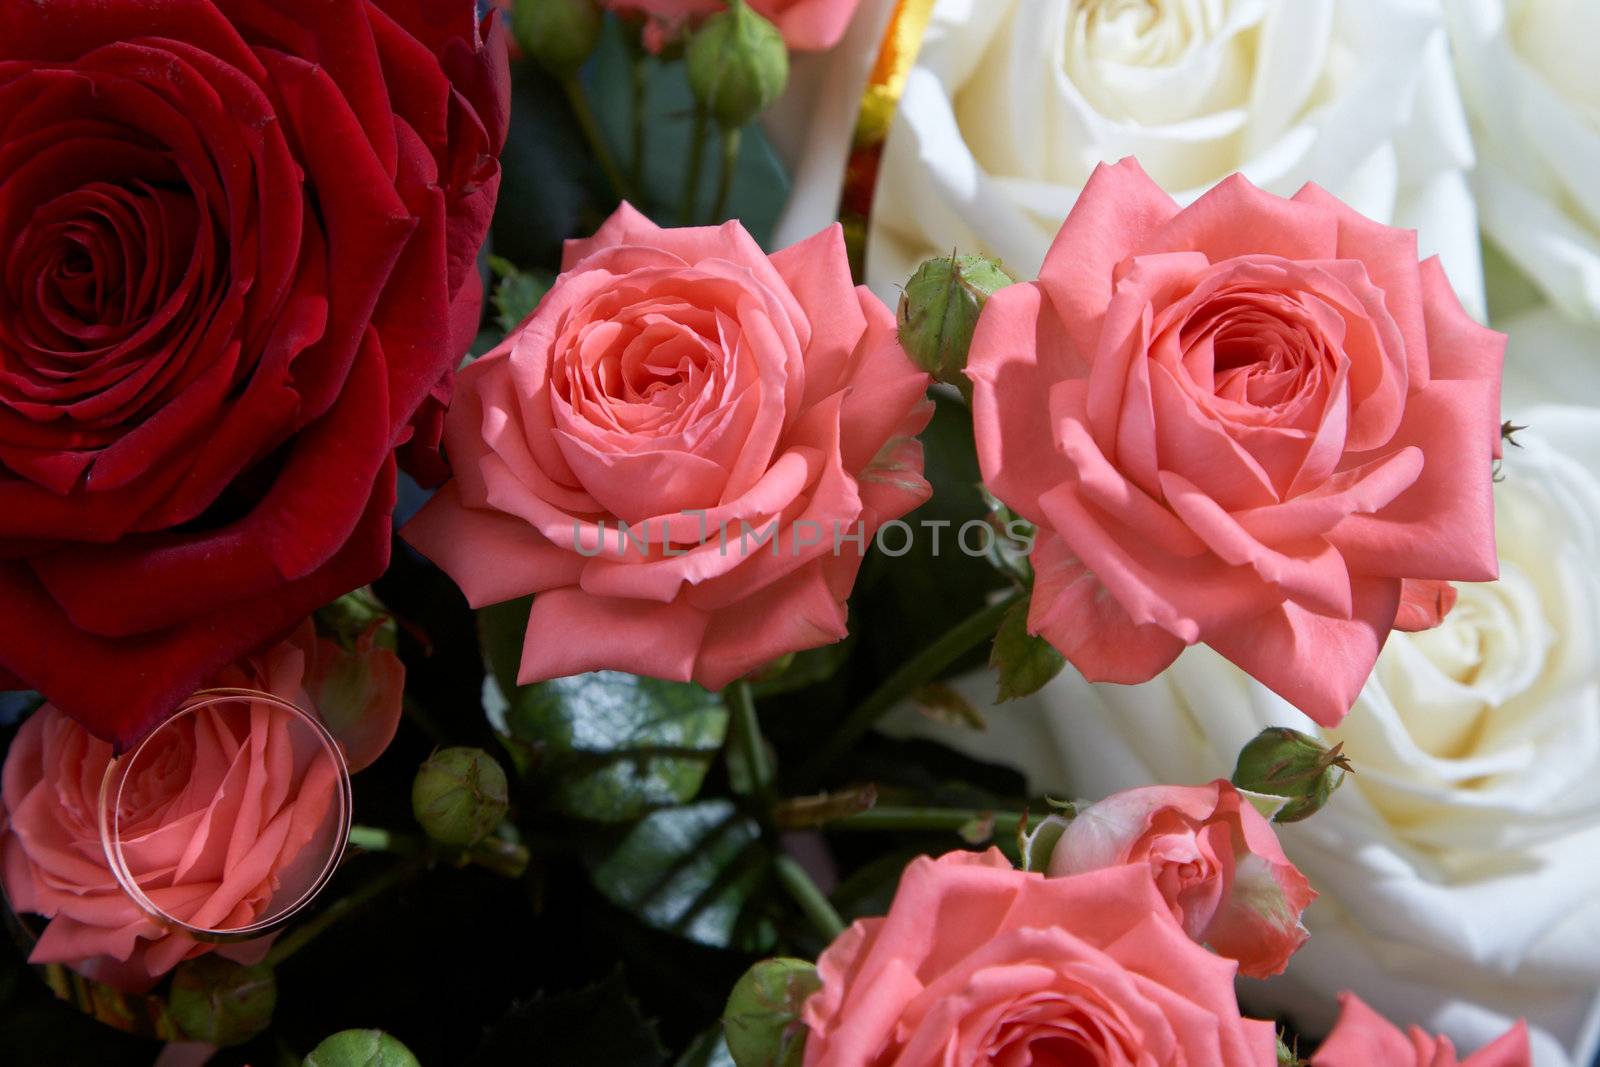 An image of pink and red roses